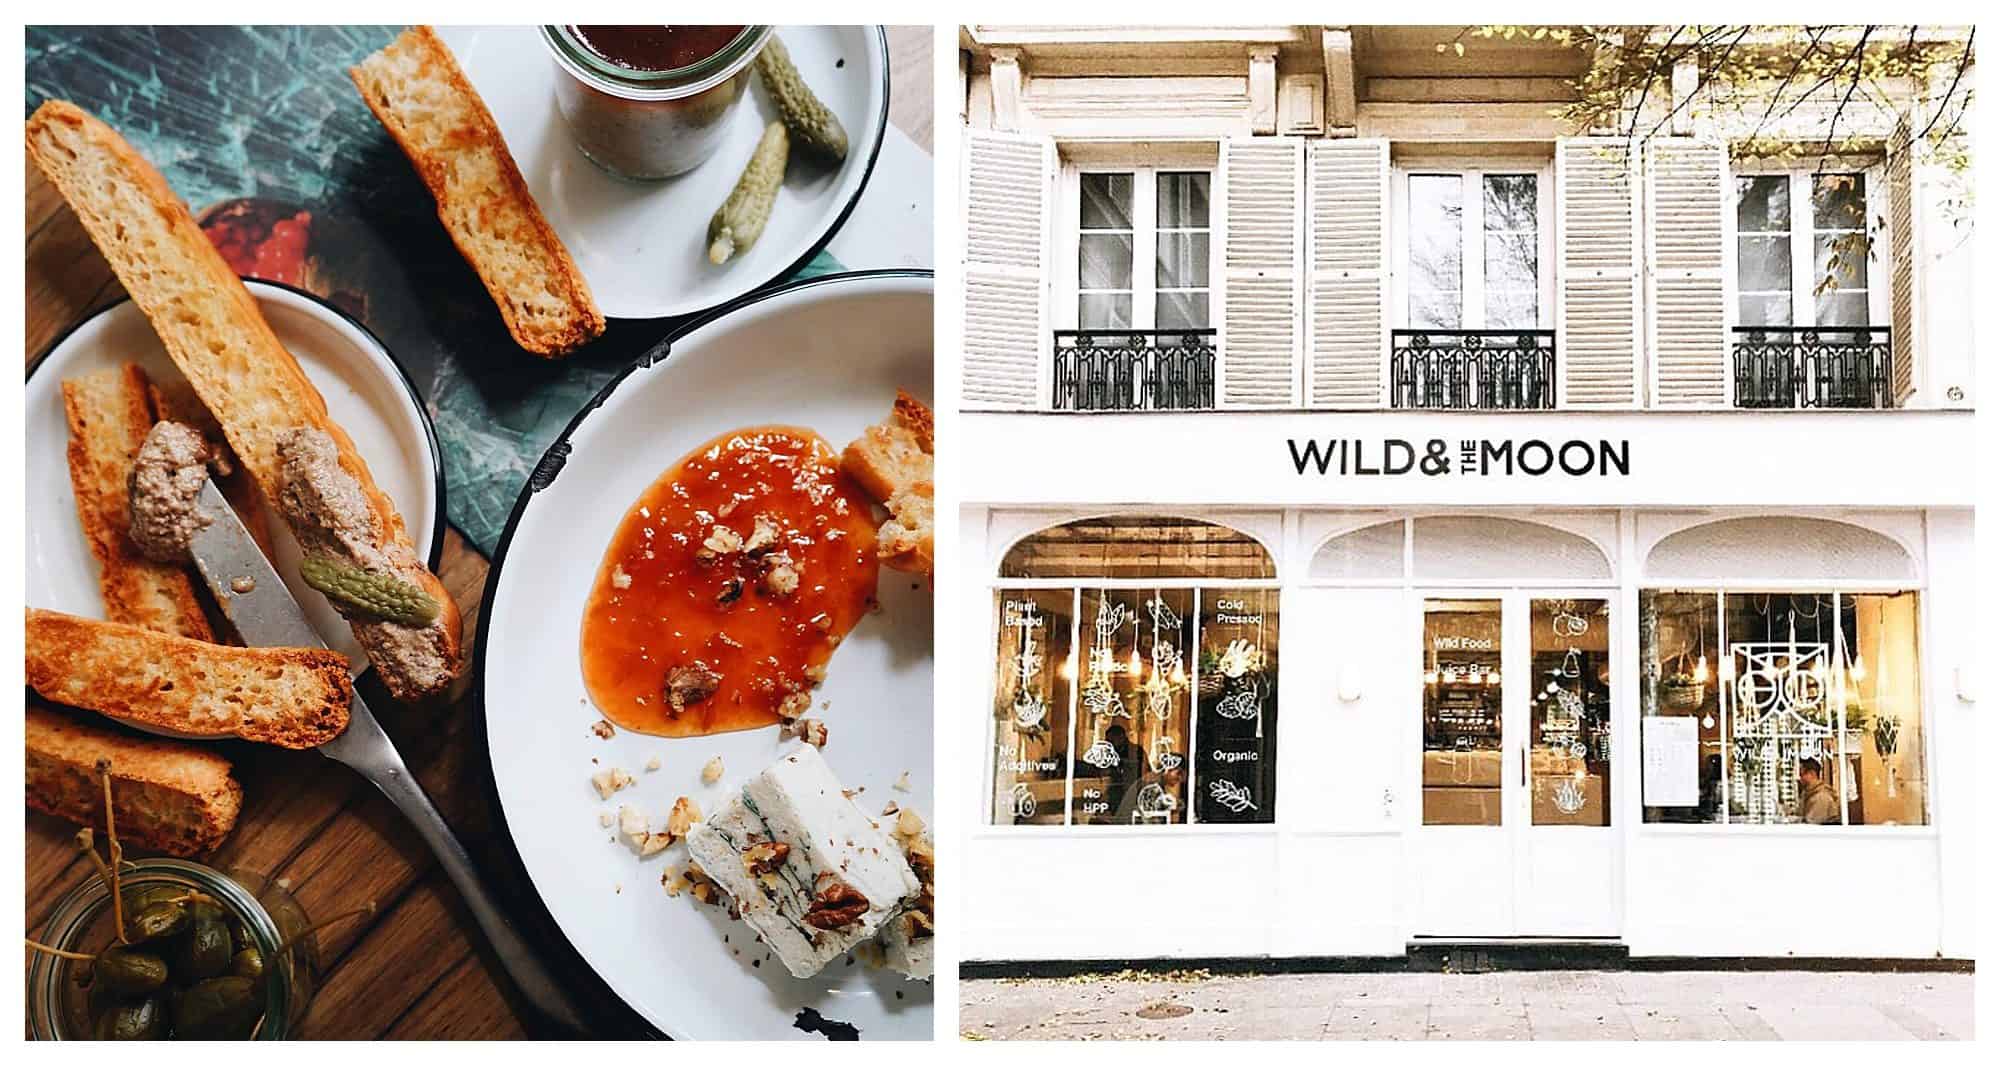 Crusty gluten-free focaccia bread (left) and the white exterior of Wild and the Moon vegan café (right) in Paris.